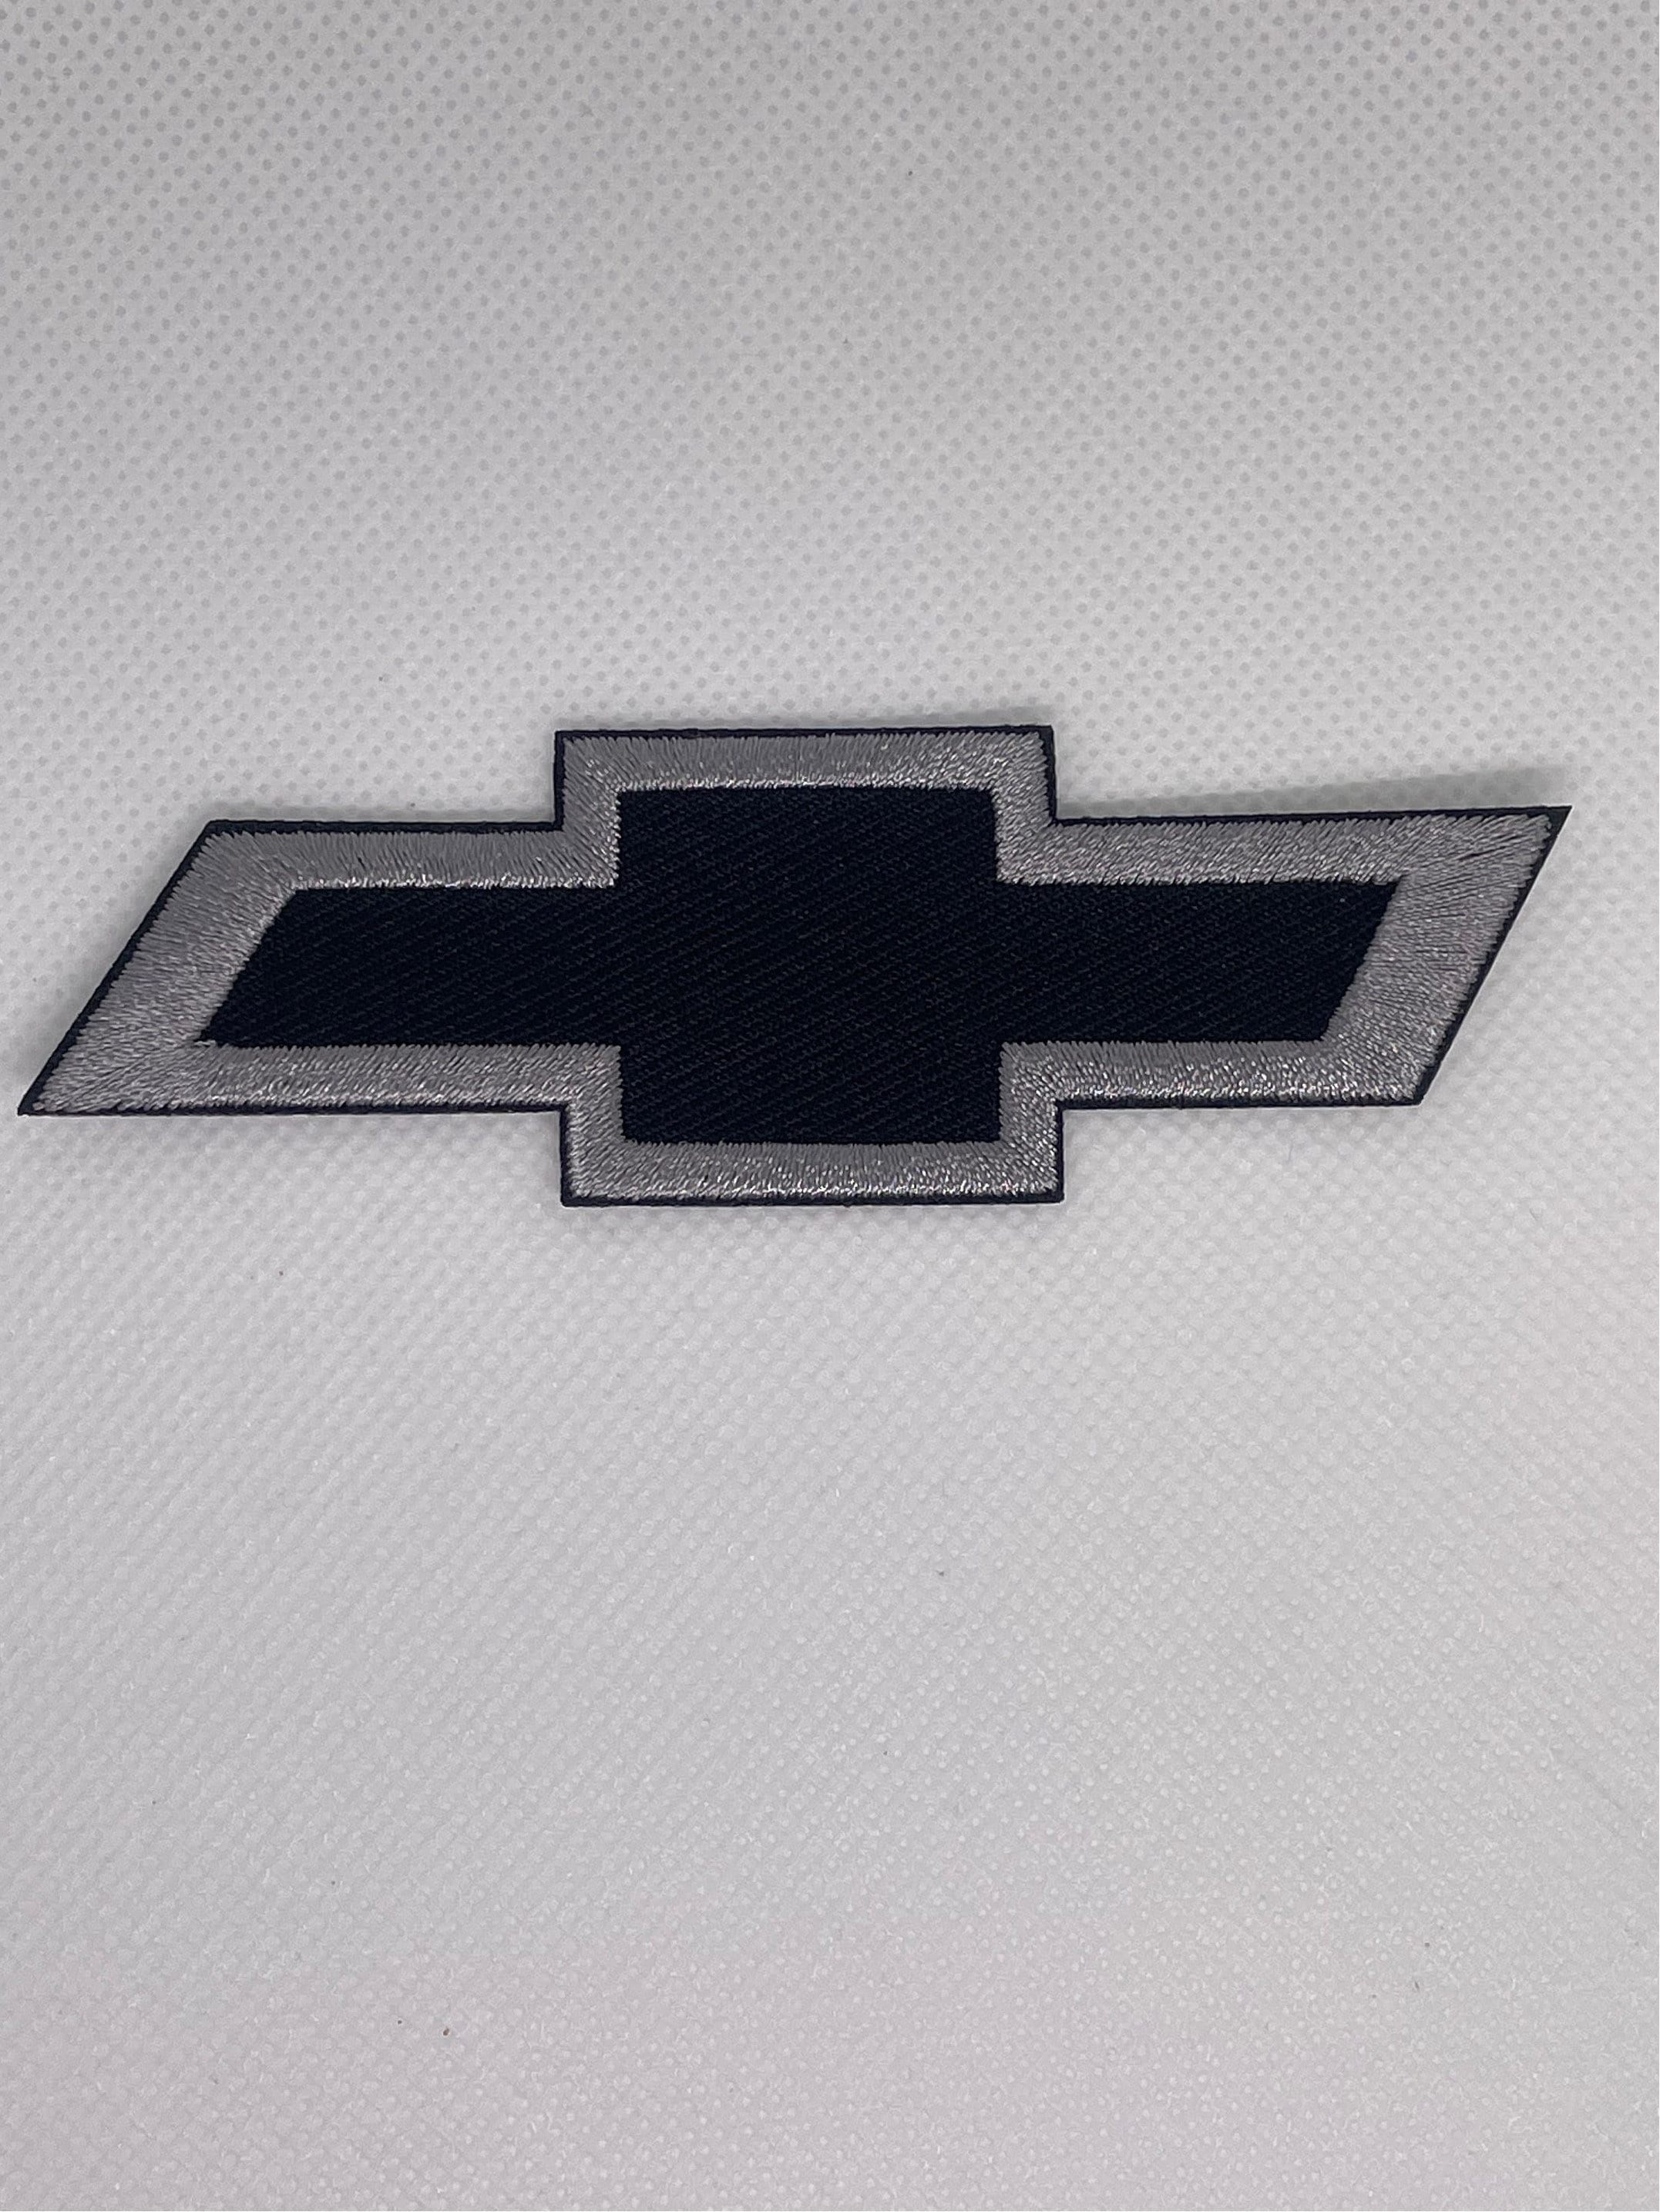 (3) Sports Logo/ Emblem Embroidered Iron On Patches! swoosh White 2x .75”  Nice